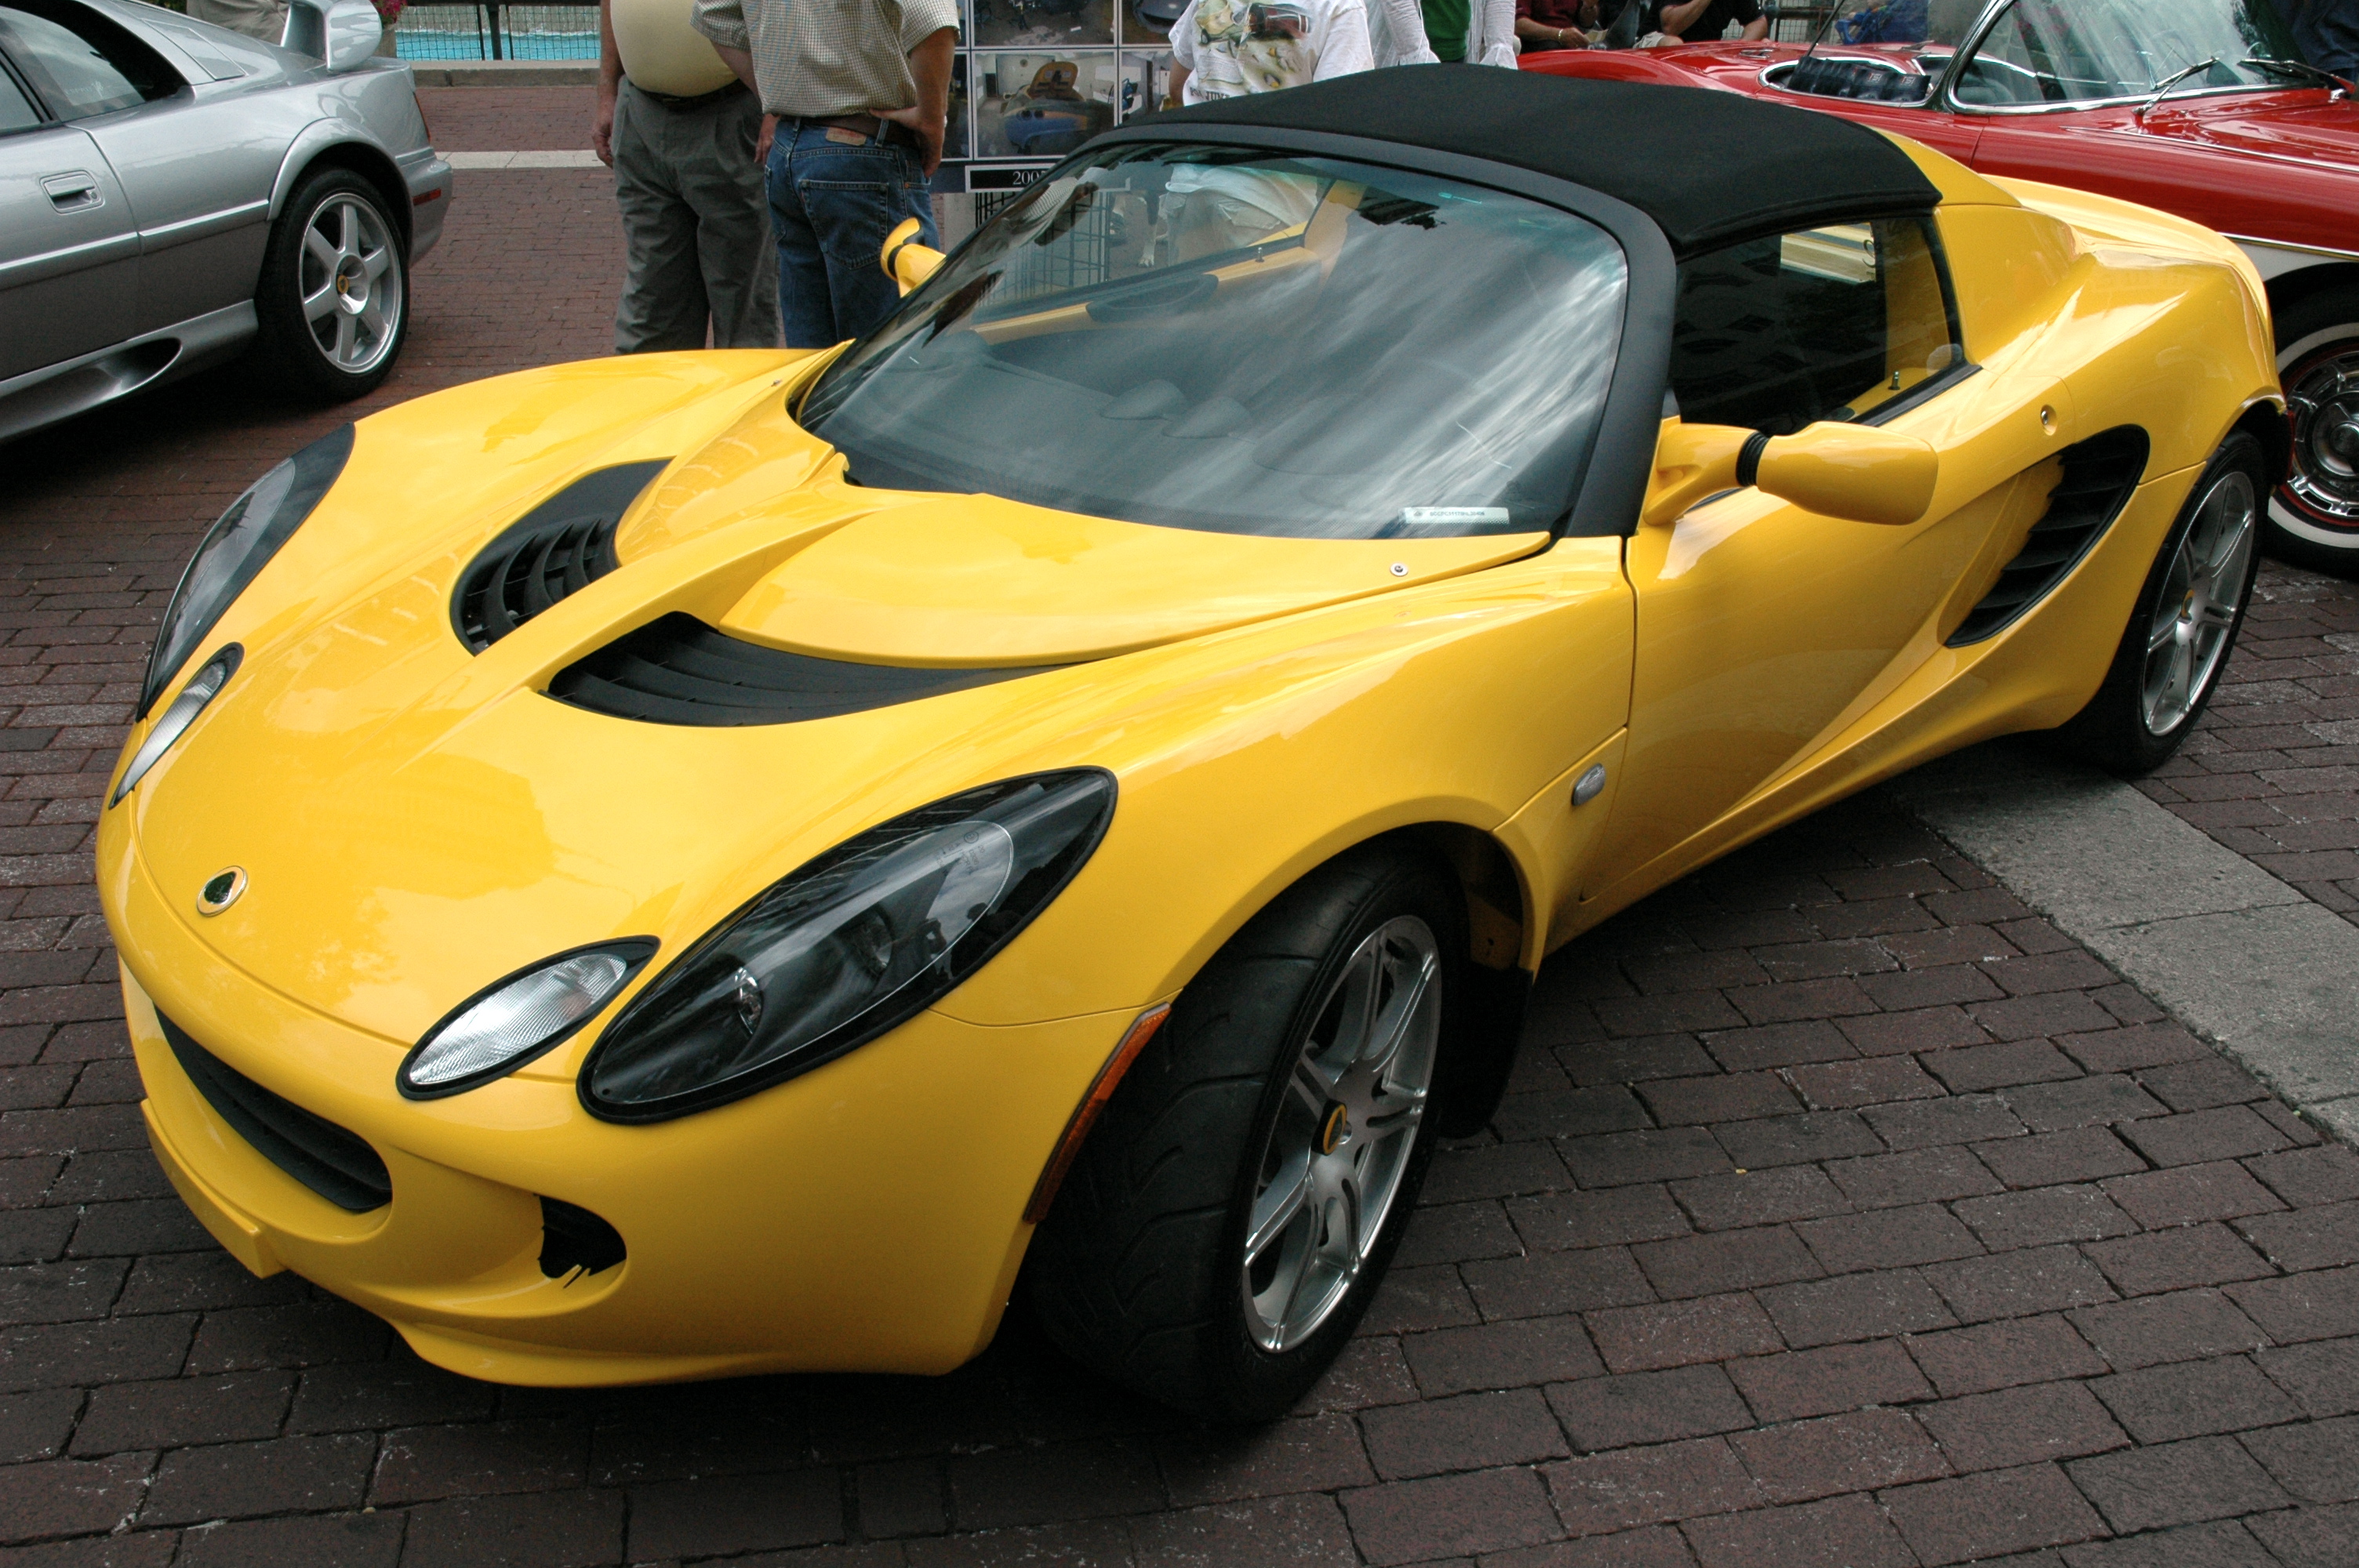 Lotus Elise 6 High Quality Lotus Elise Pictures On